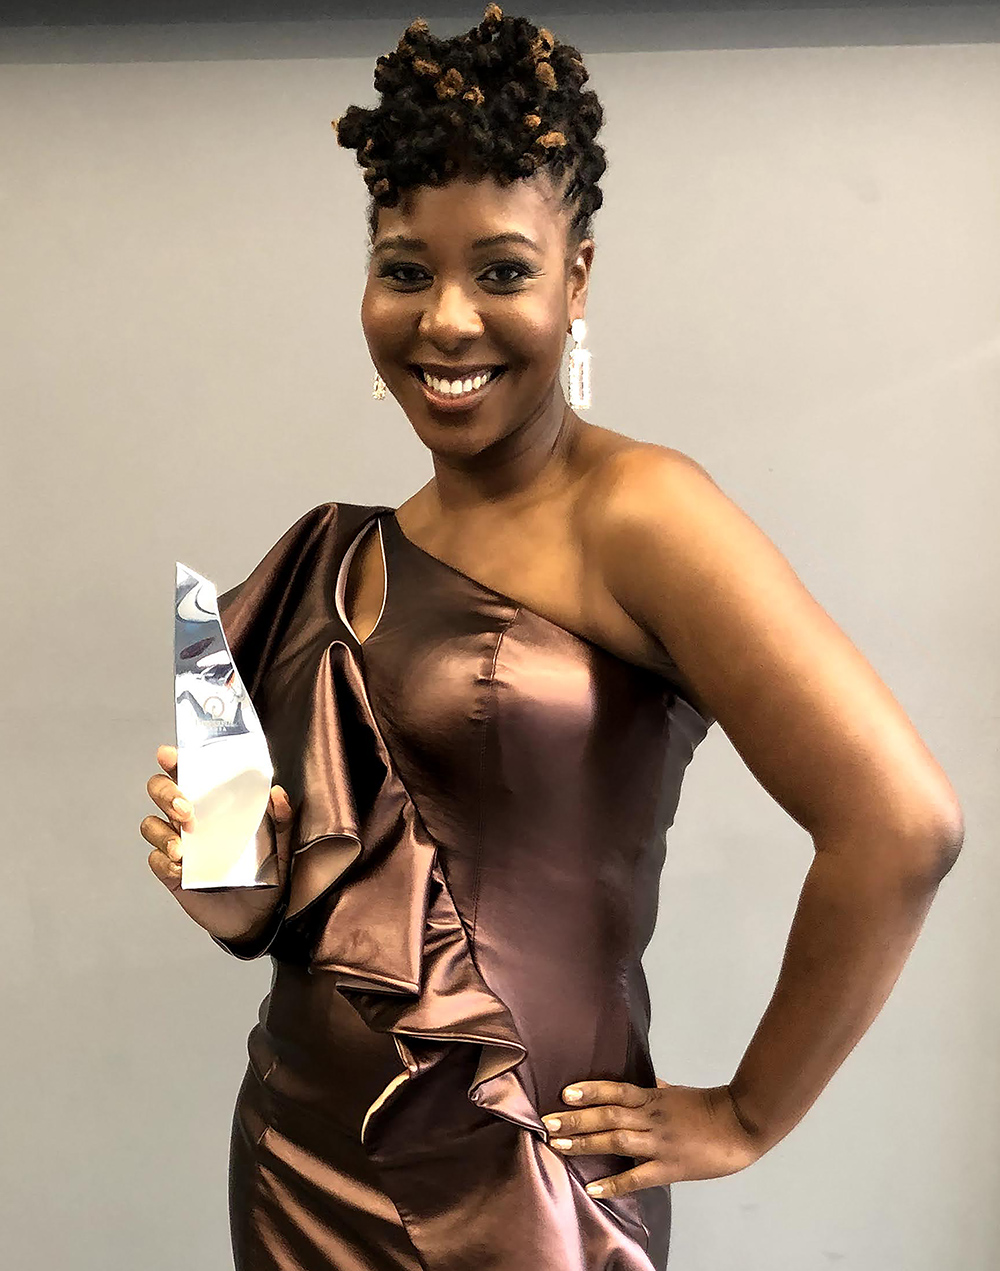 Medina King posing with her Herman Miller Design and Innovation Award at the Powerlist Black Excellence Award